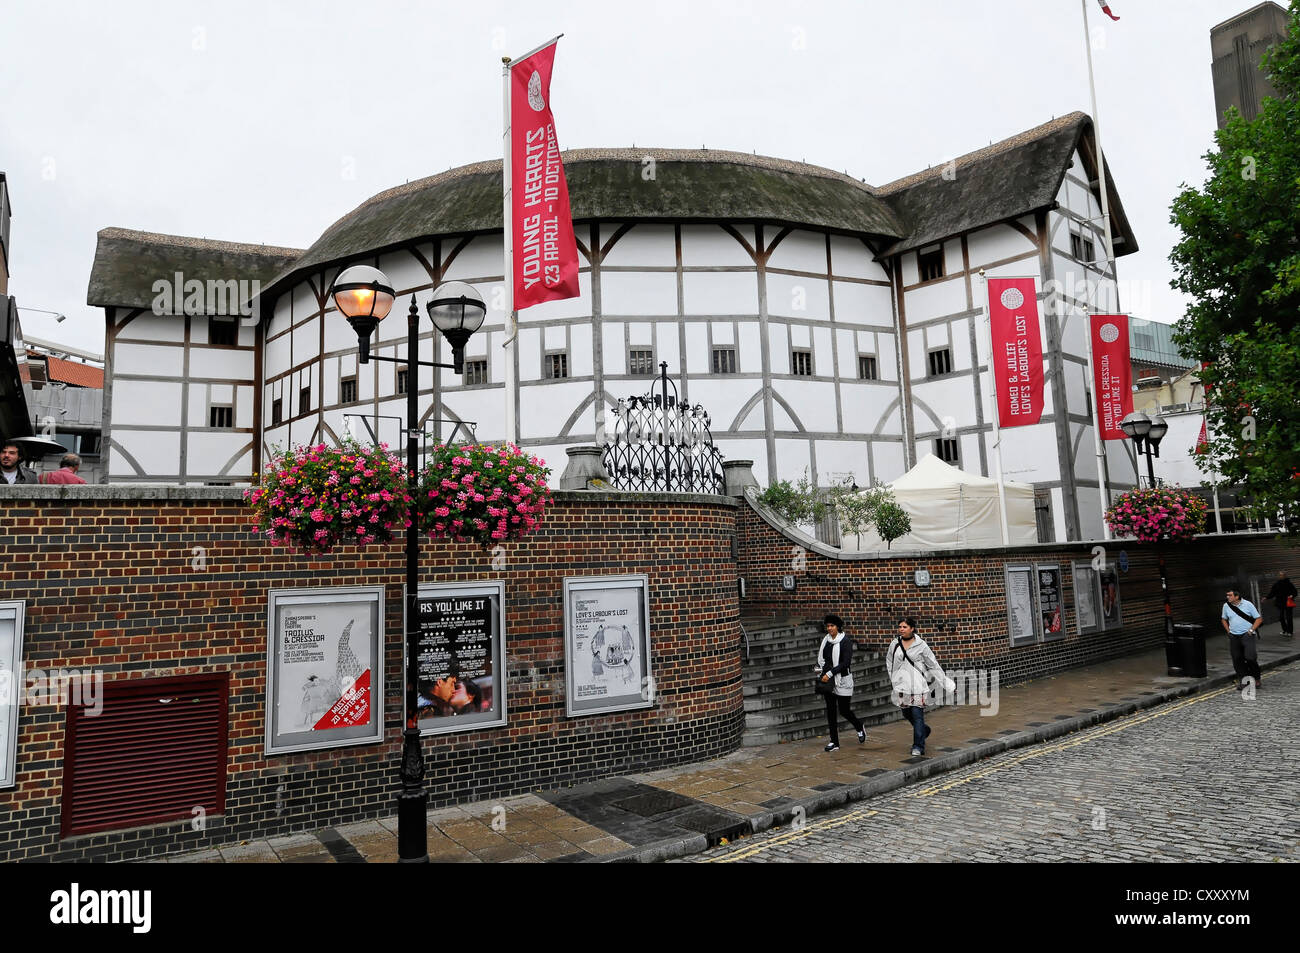 The Shakespeare Globe Theatre on the Southbank of the River Thames, London, England, Great Britain, Europe Stock Photo